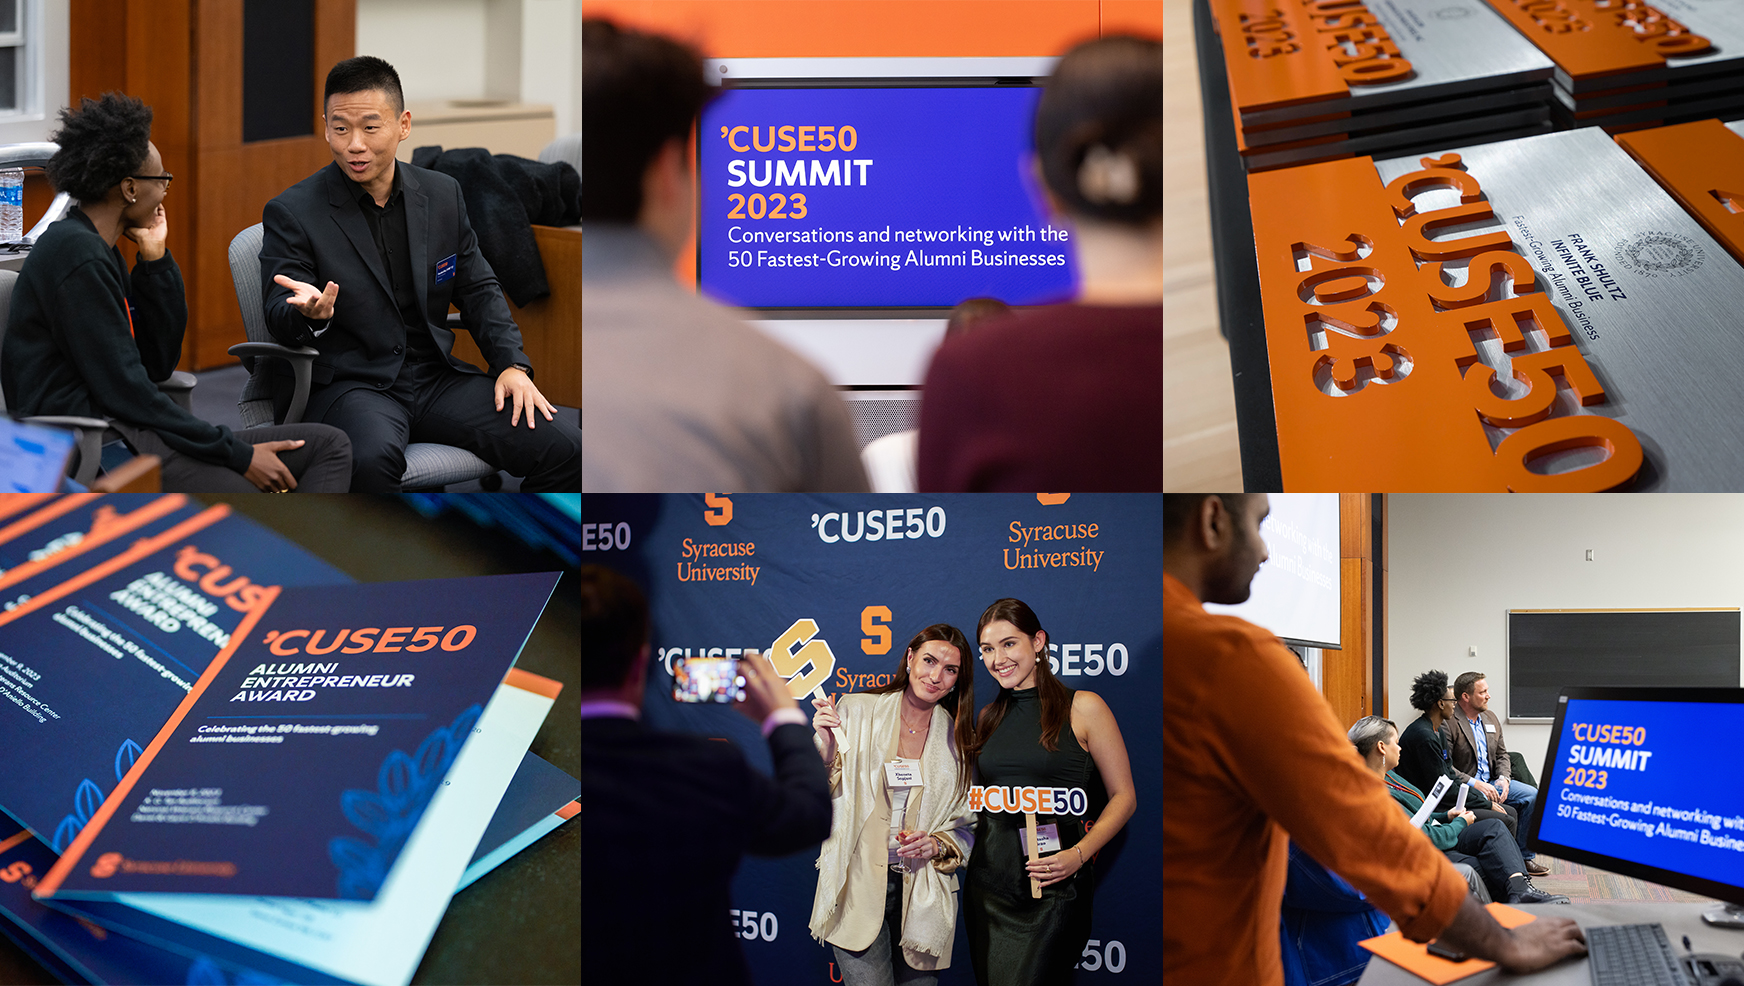 Collage of photos from the 2023 'CUSE50 events